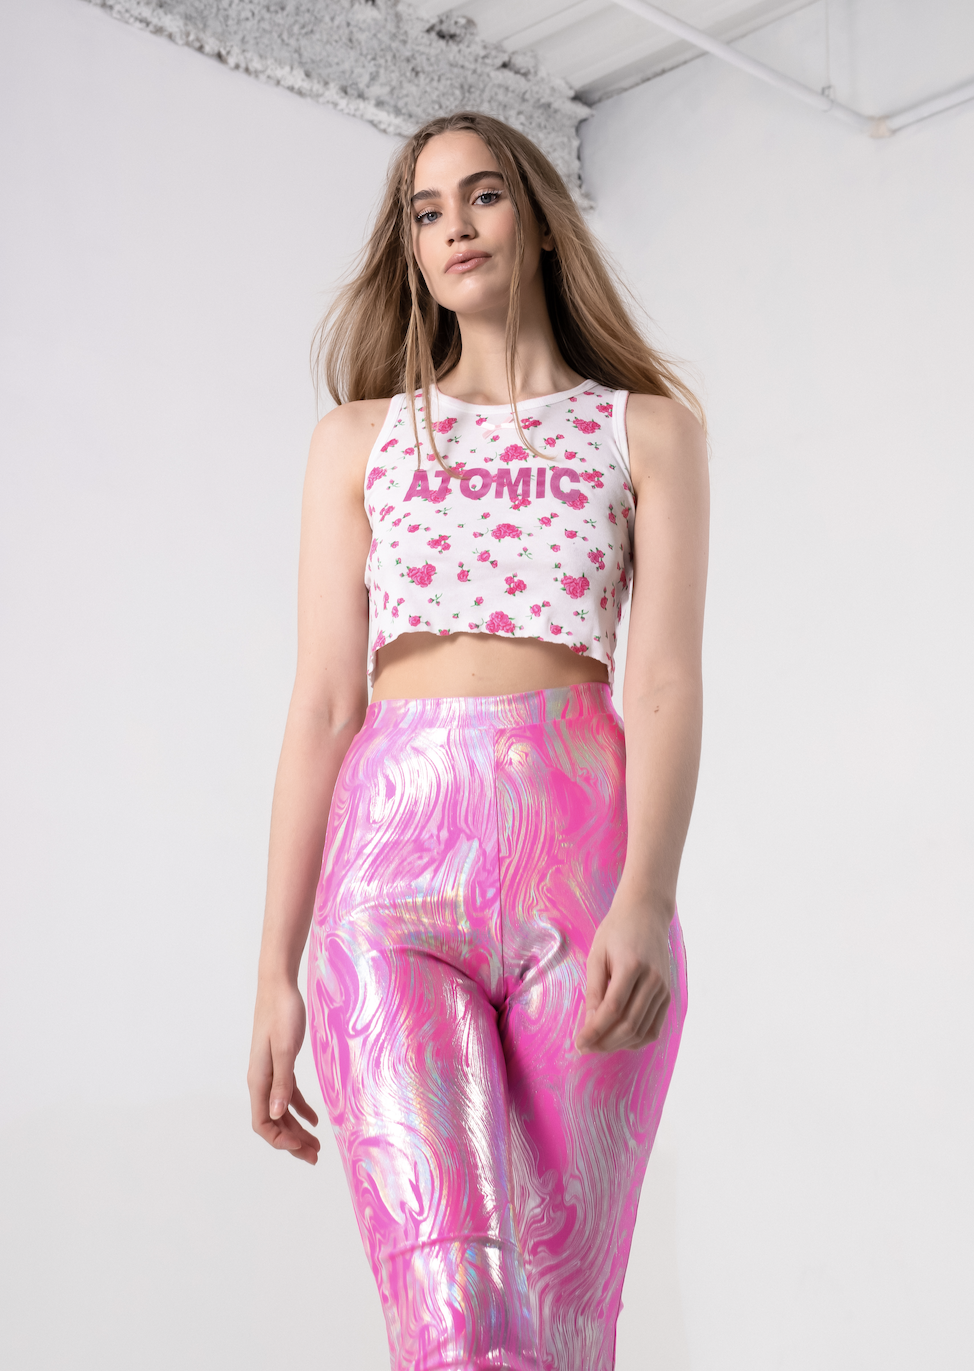 stardust aurora pants – Cool Is A Construct